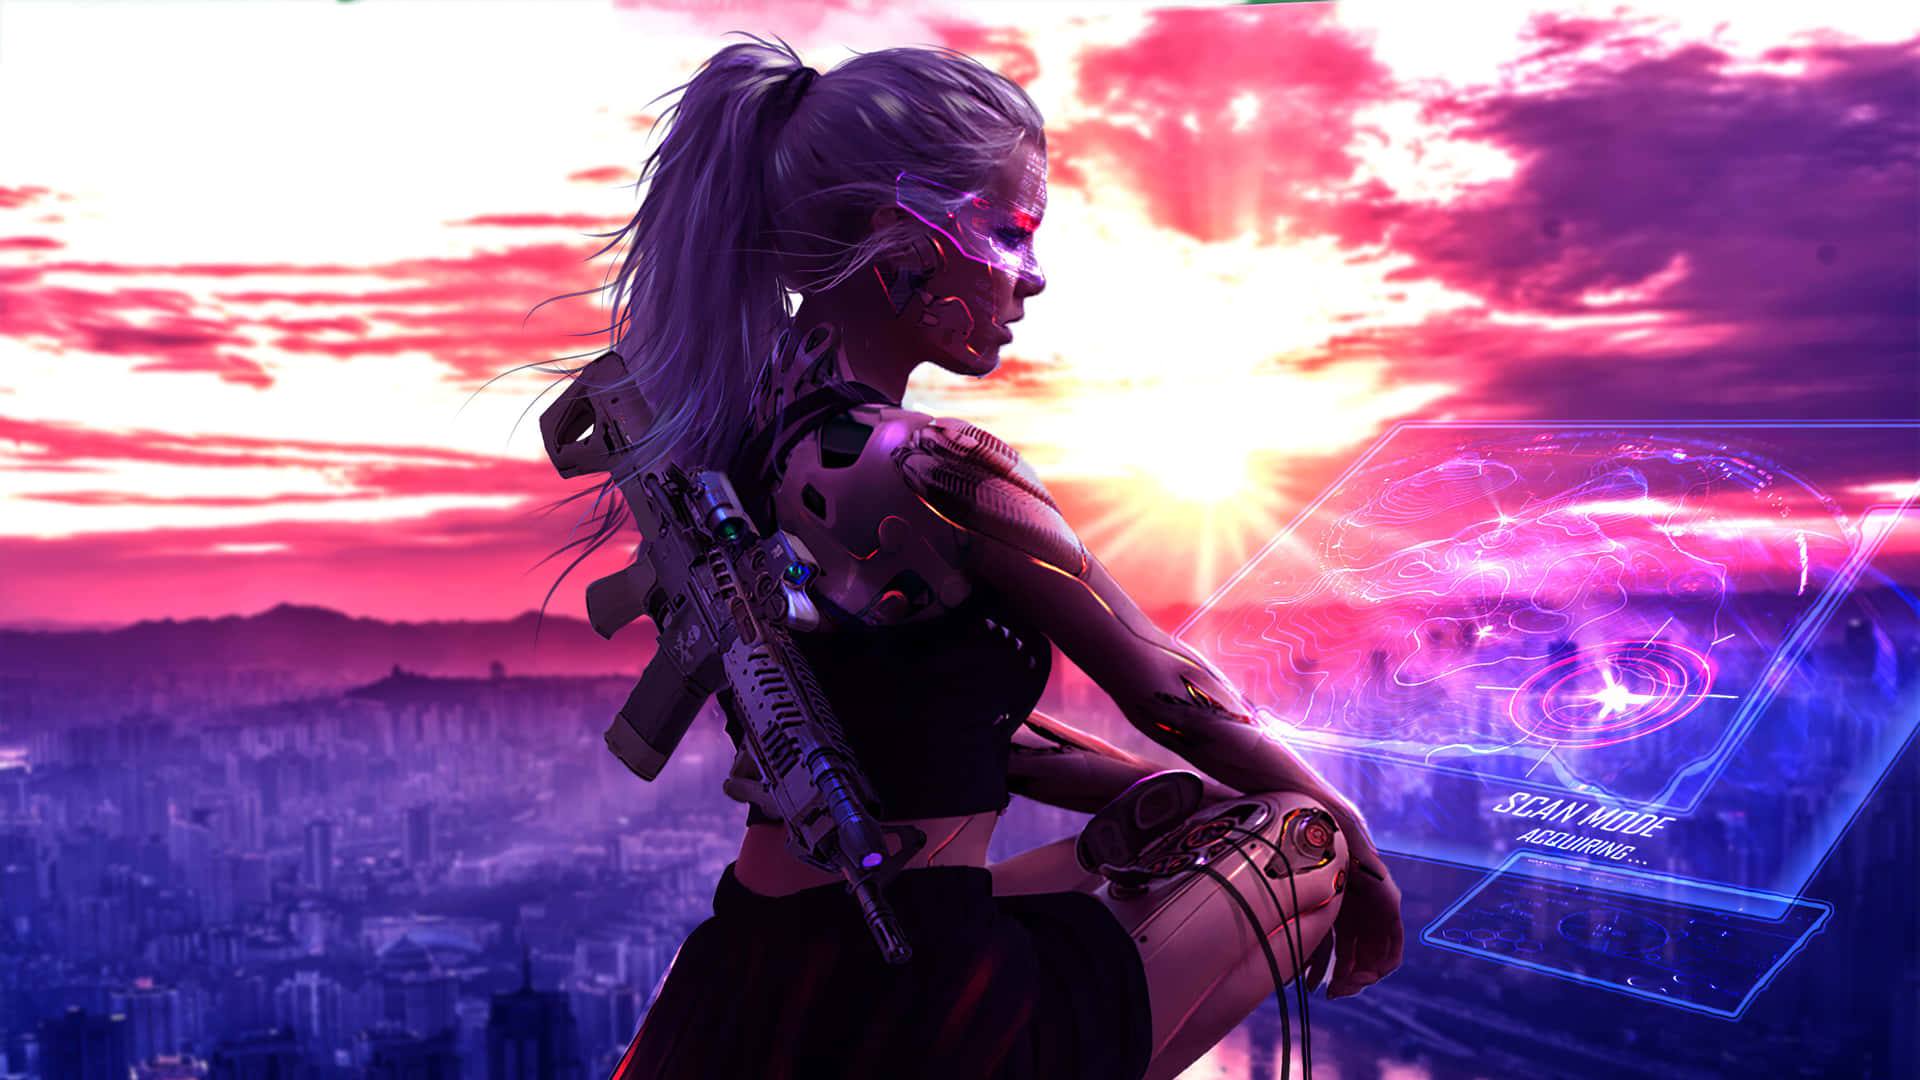 Explore The Neon-lit Cityscape Of A Cyberpunk World Lit Up By Neon-lights. Background